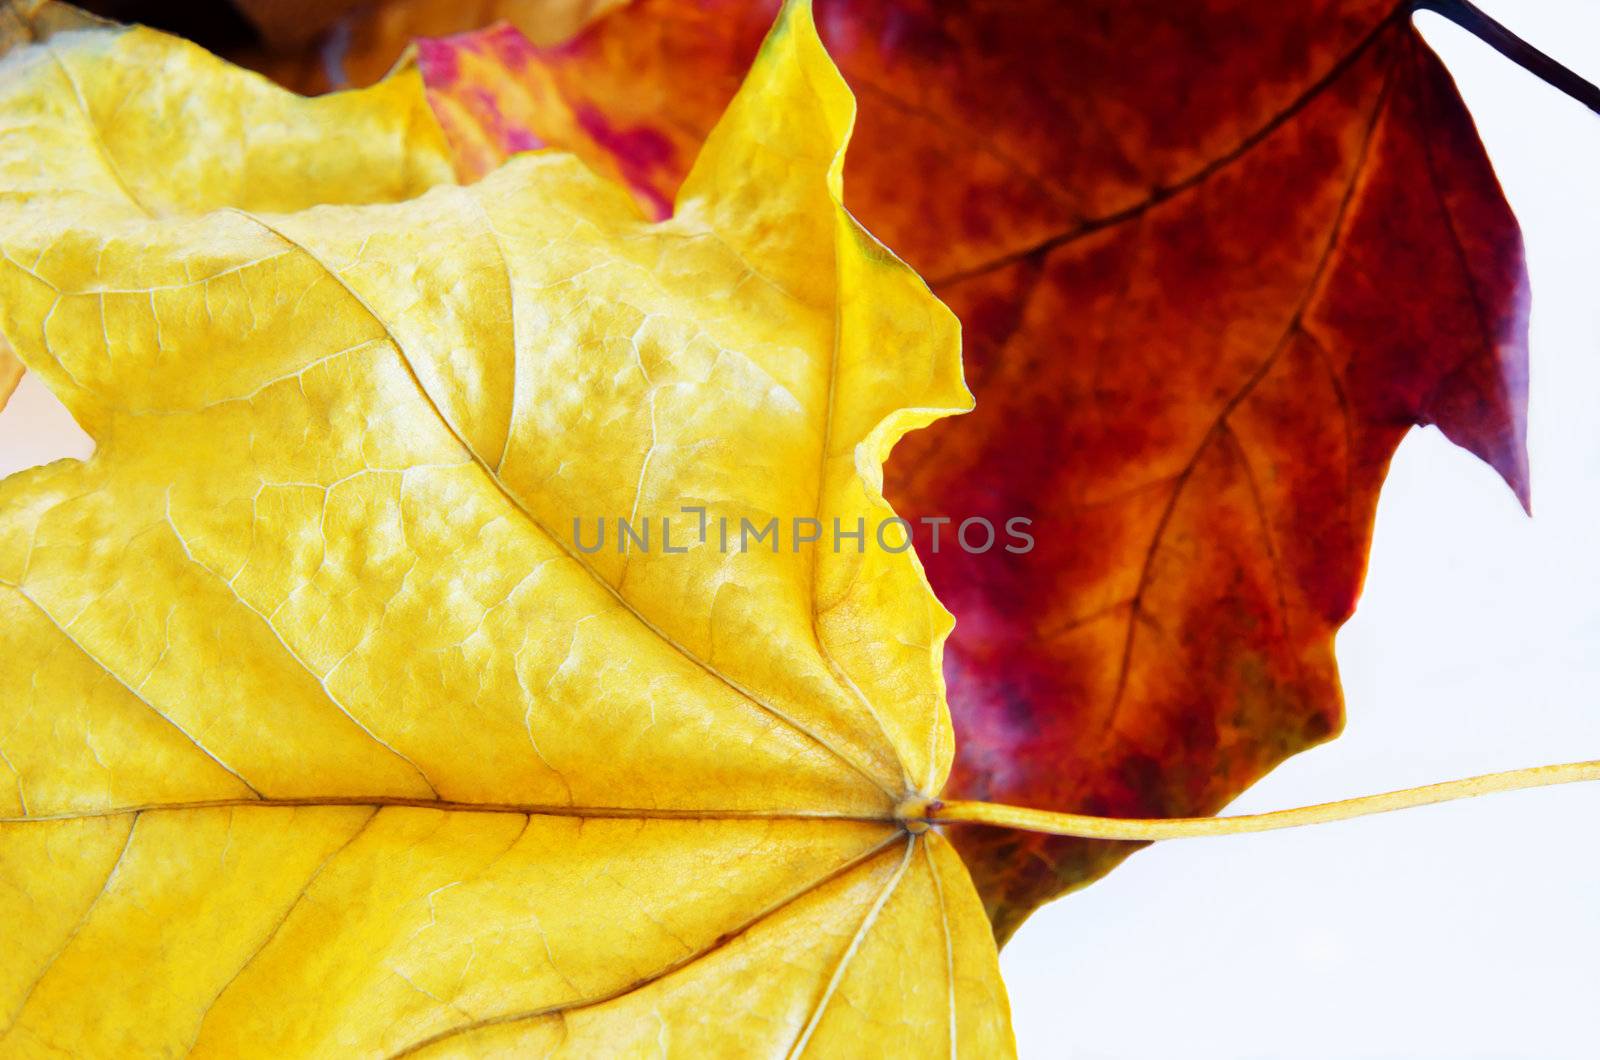 Close up (macro) of two Autumn leaves.  Bright yellow leaf in foreground, deep red to pink in background.